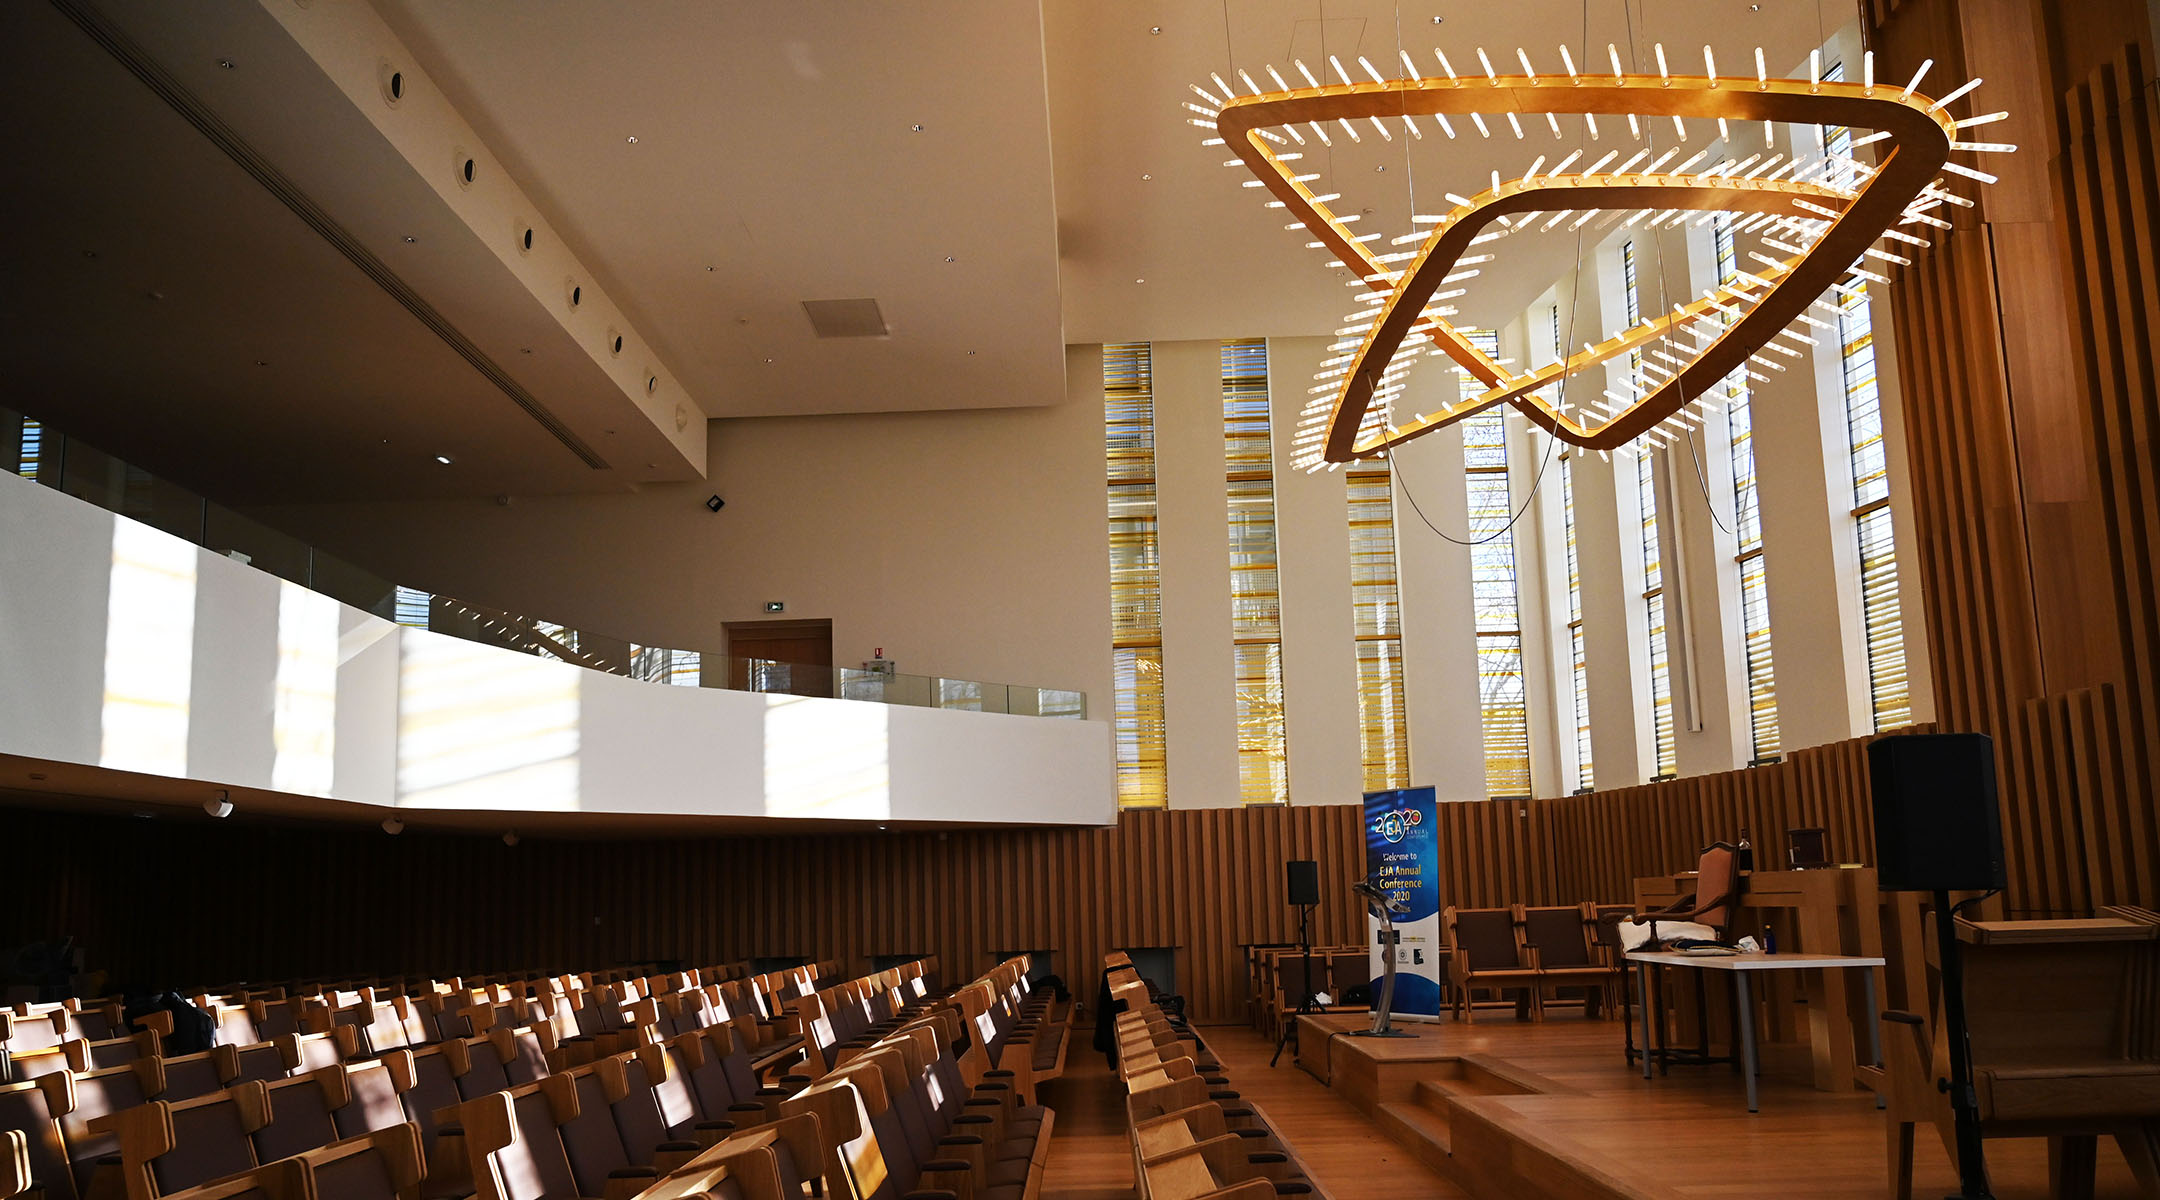 A look inside the Safra Synagogue at the European Jewish Center in Paris, Feb. 26, 2020. (Cnaan Liphshiz)